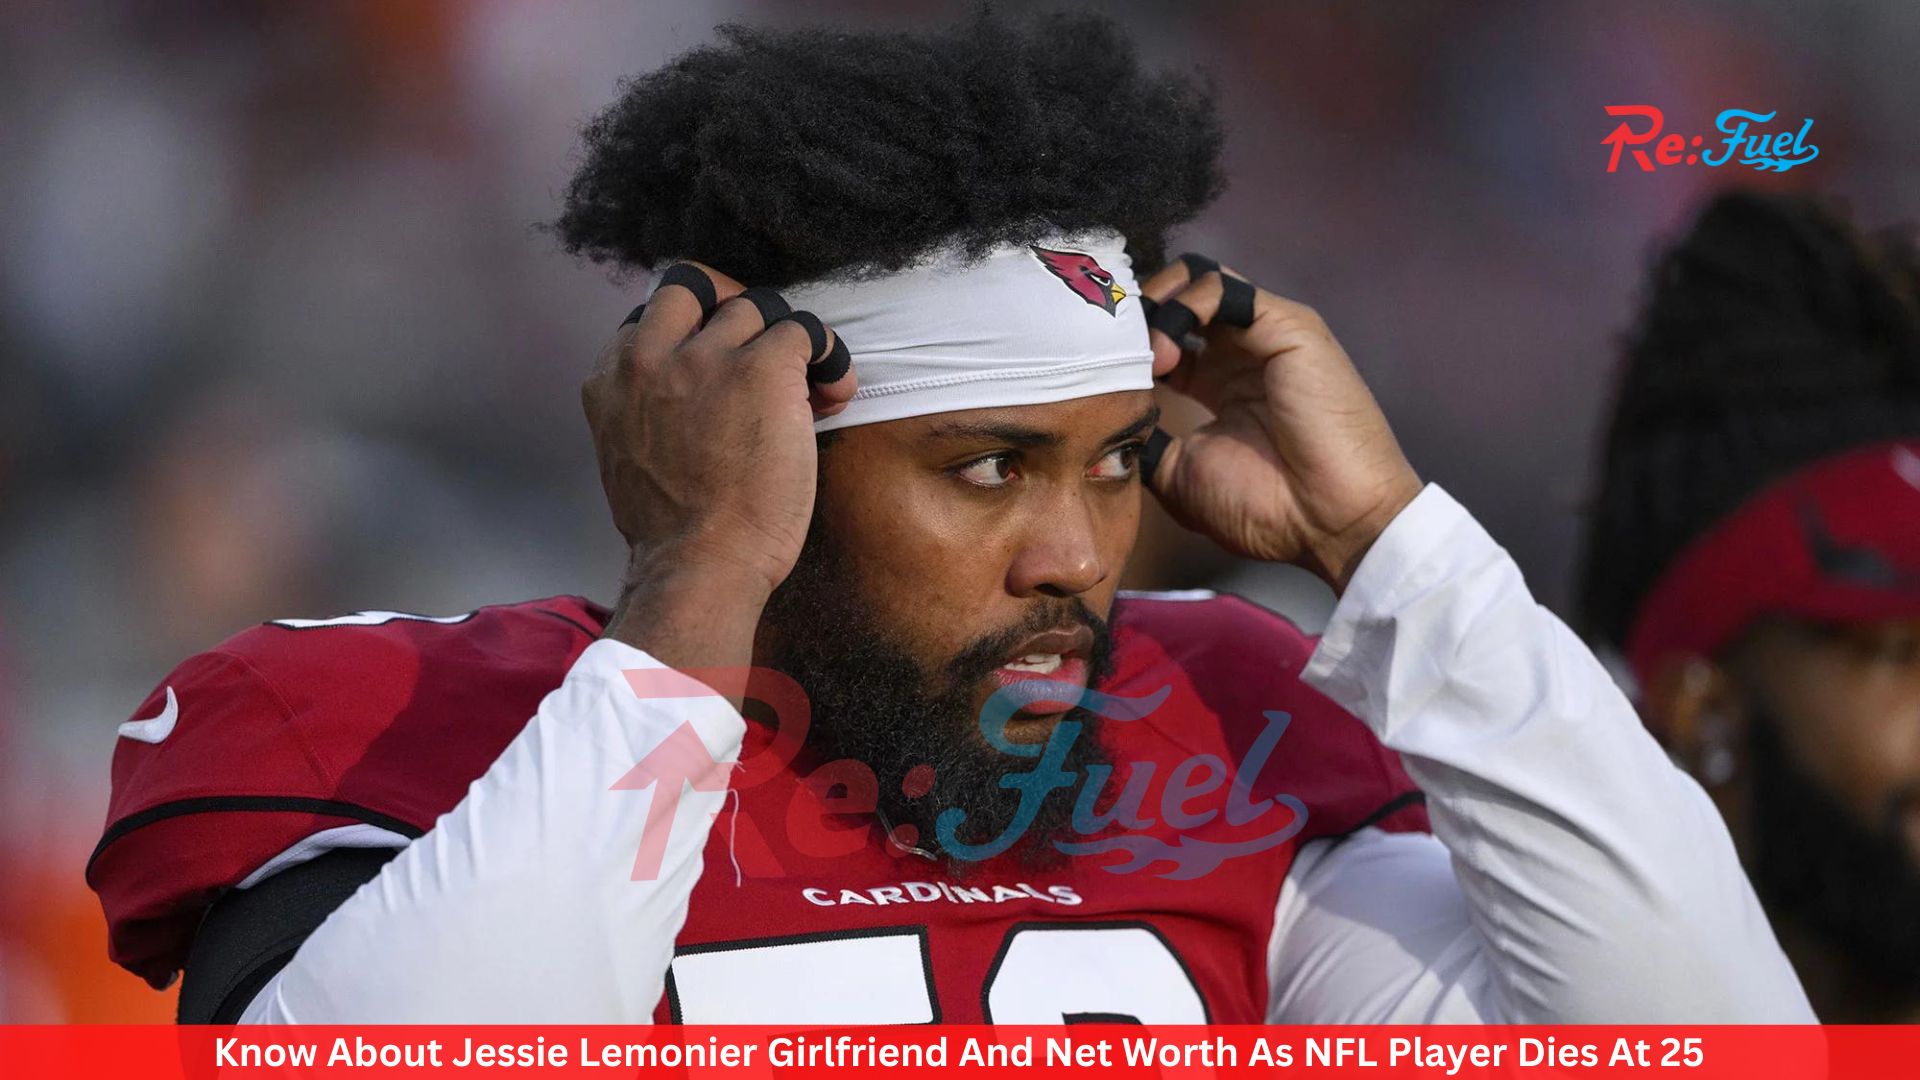 Know About Jessie Lemonier Girlfriend And Net Worth As NFL Player Dies At 25